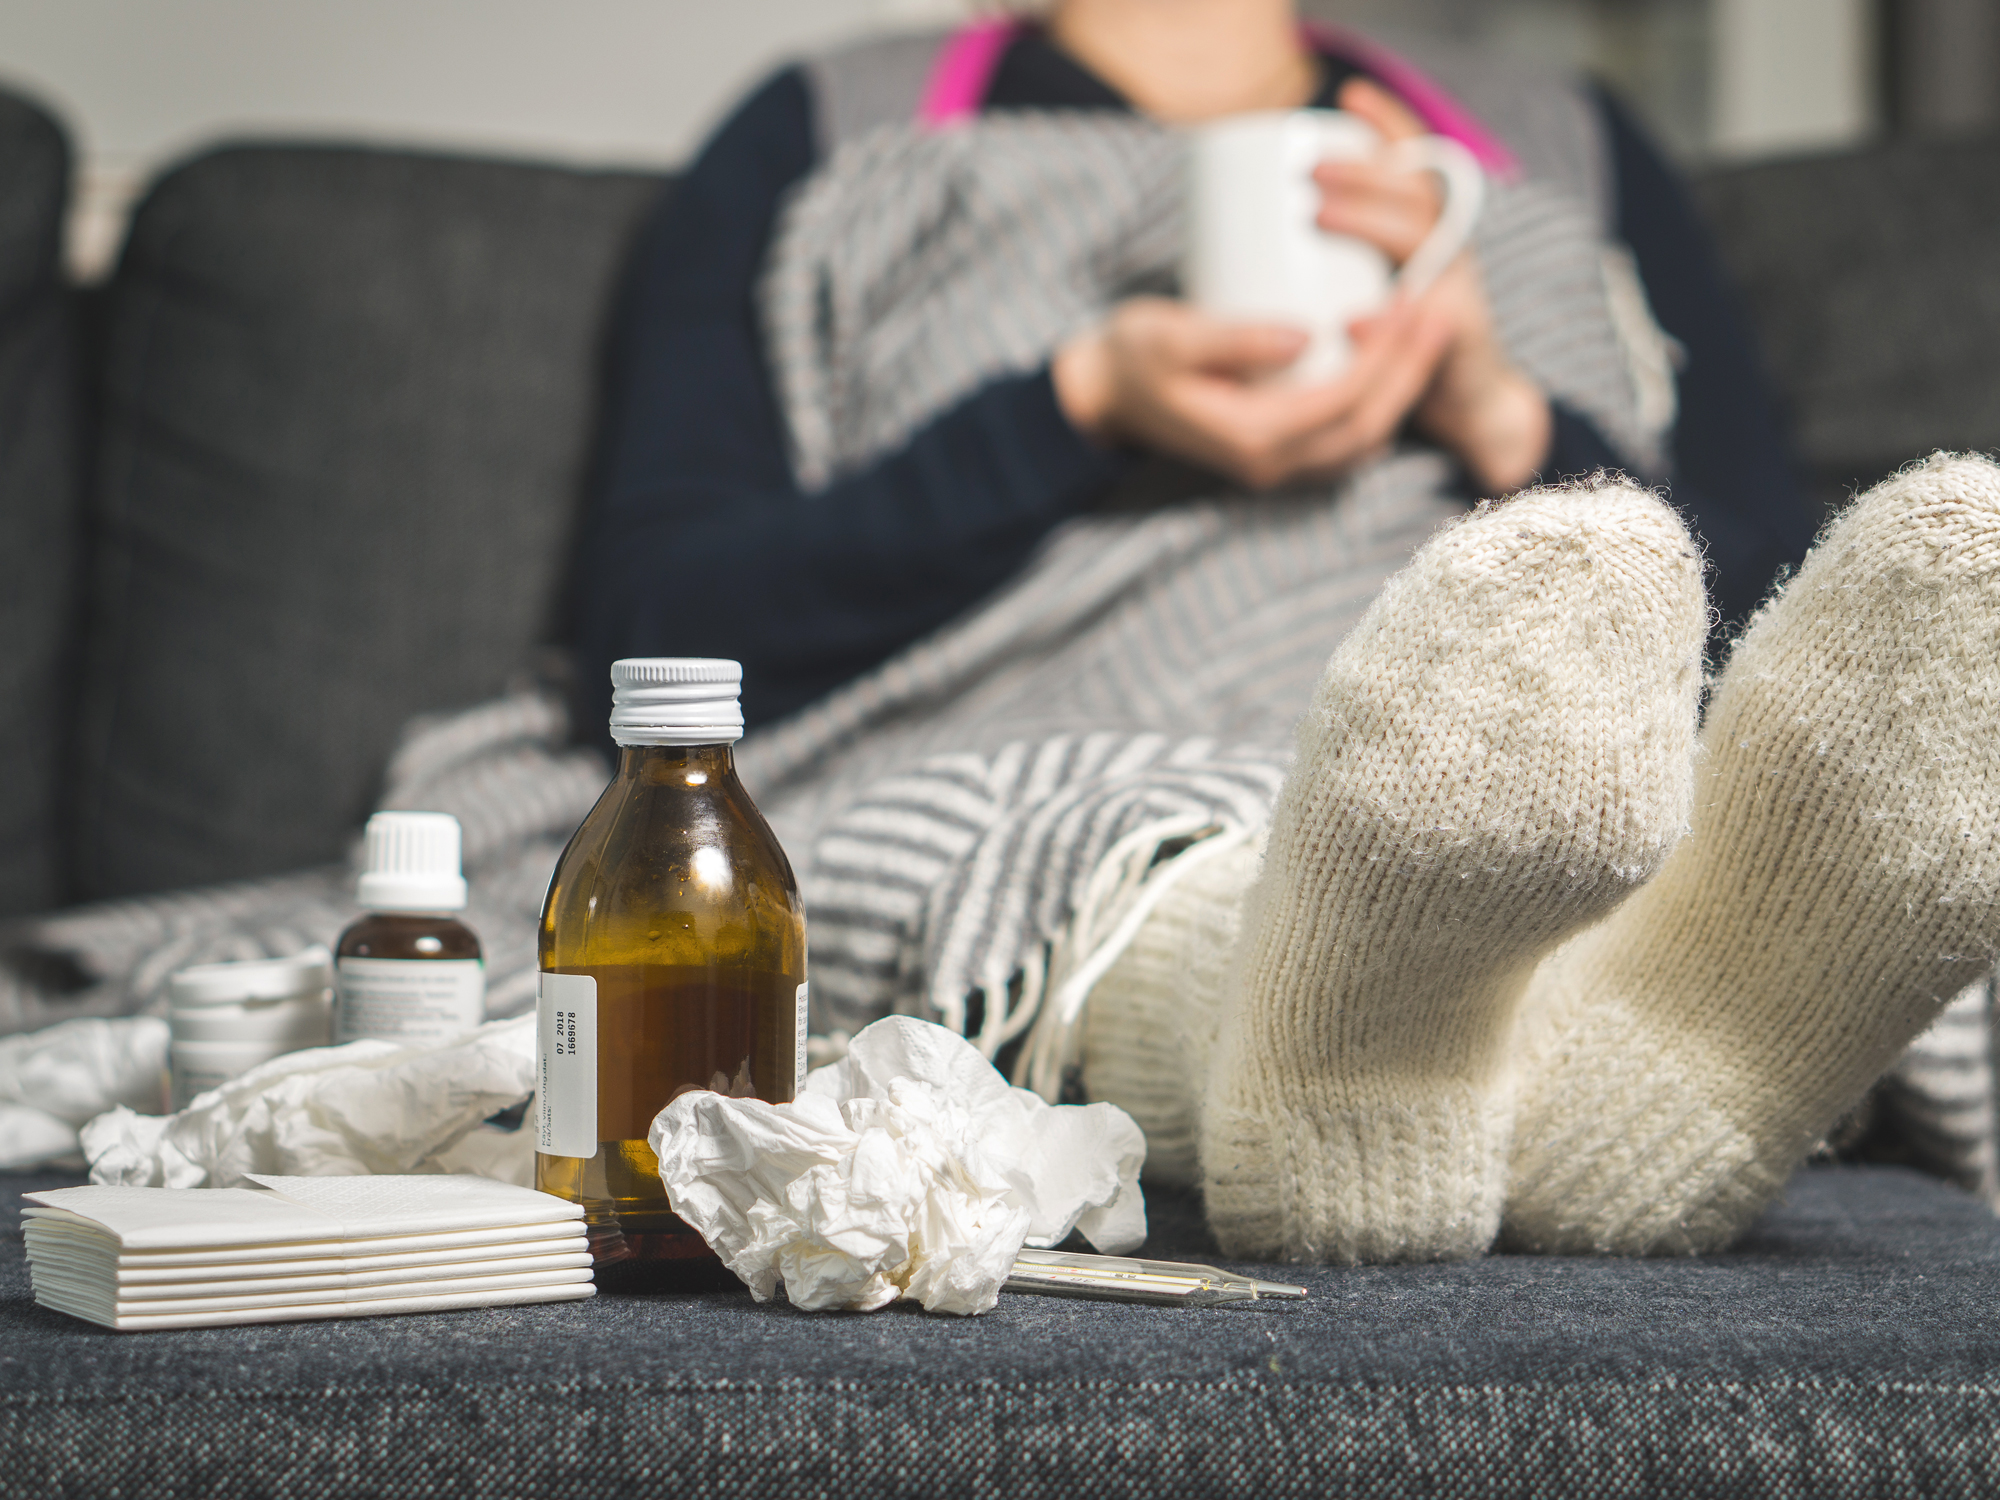 Doing this now could save you next flu season